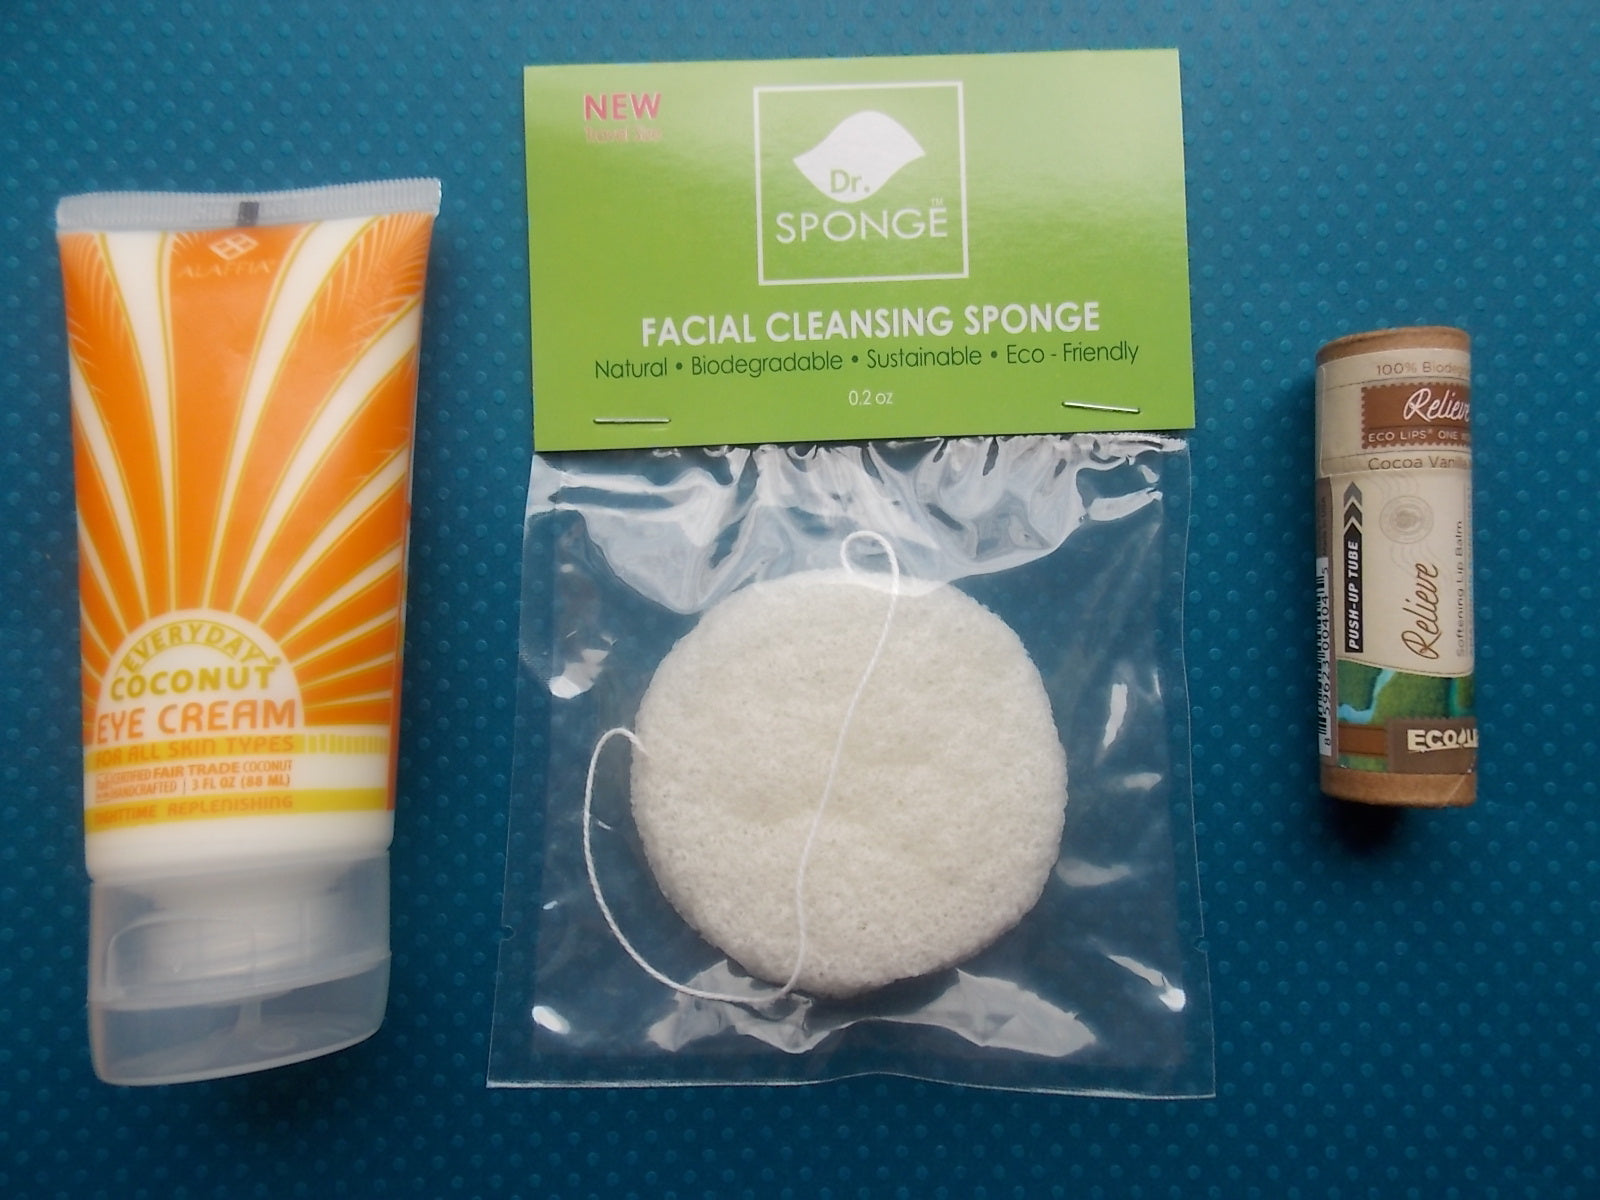 Happy Earth Day 2014! 10 Best Eco-Friendly Scrubs, Lotions, Makeup Brushes - Konjac Sponge, Everyday Coconut Eye Cream, Kat Burki Ocean Mineral Face Wash Review